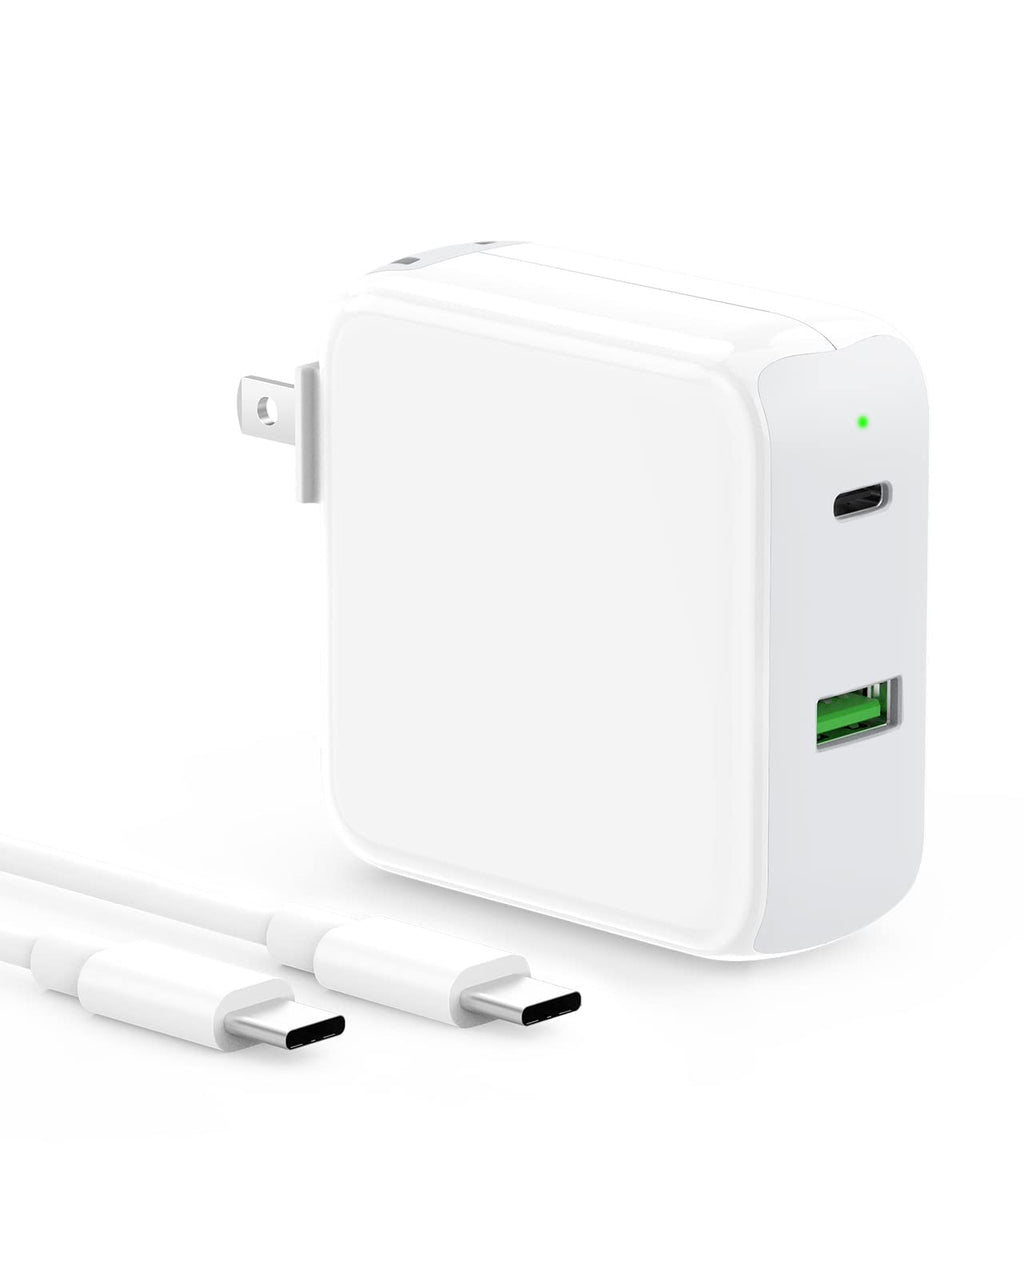  [AUSTRALIA] - USB C Charger for MacBook Air 13 inch, 12 in, iPad, iPhone, Samsung, 48W Dual Port with 30W USB-C Power Adapter for Mac Book Air M1 2020 2019 2018, 6.6ft Type C to C Cable